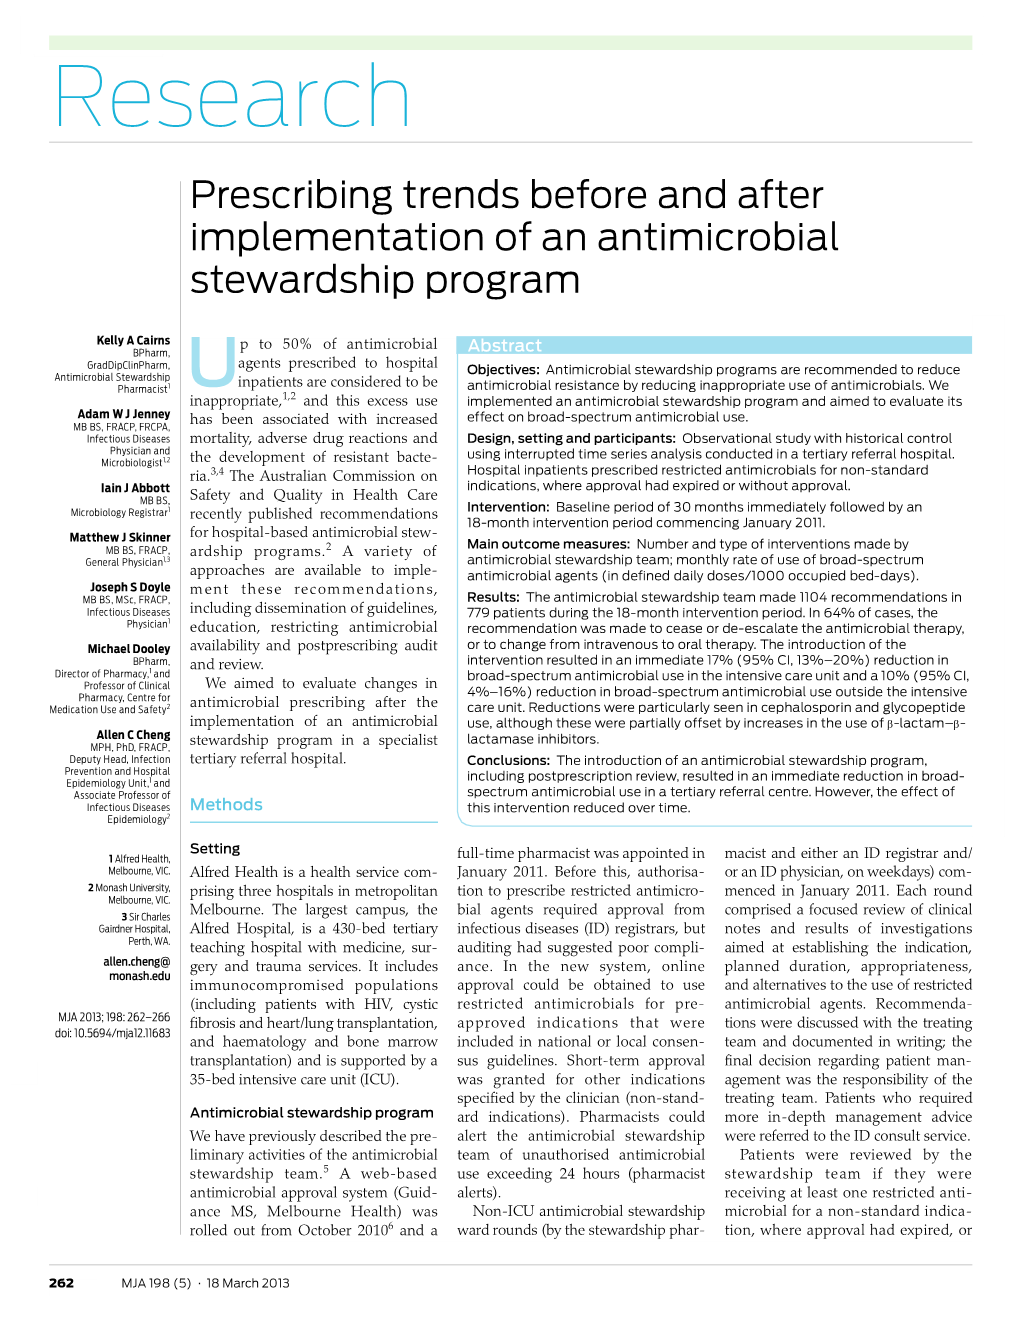 Research Research Prescribing Trends Before and After Implementation of an Antimicrobial Stewardship Program